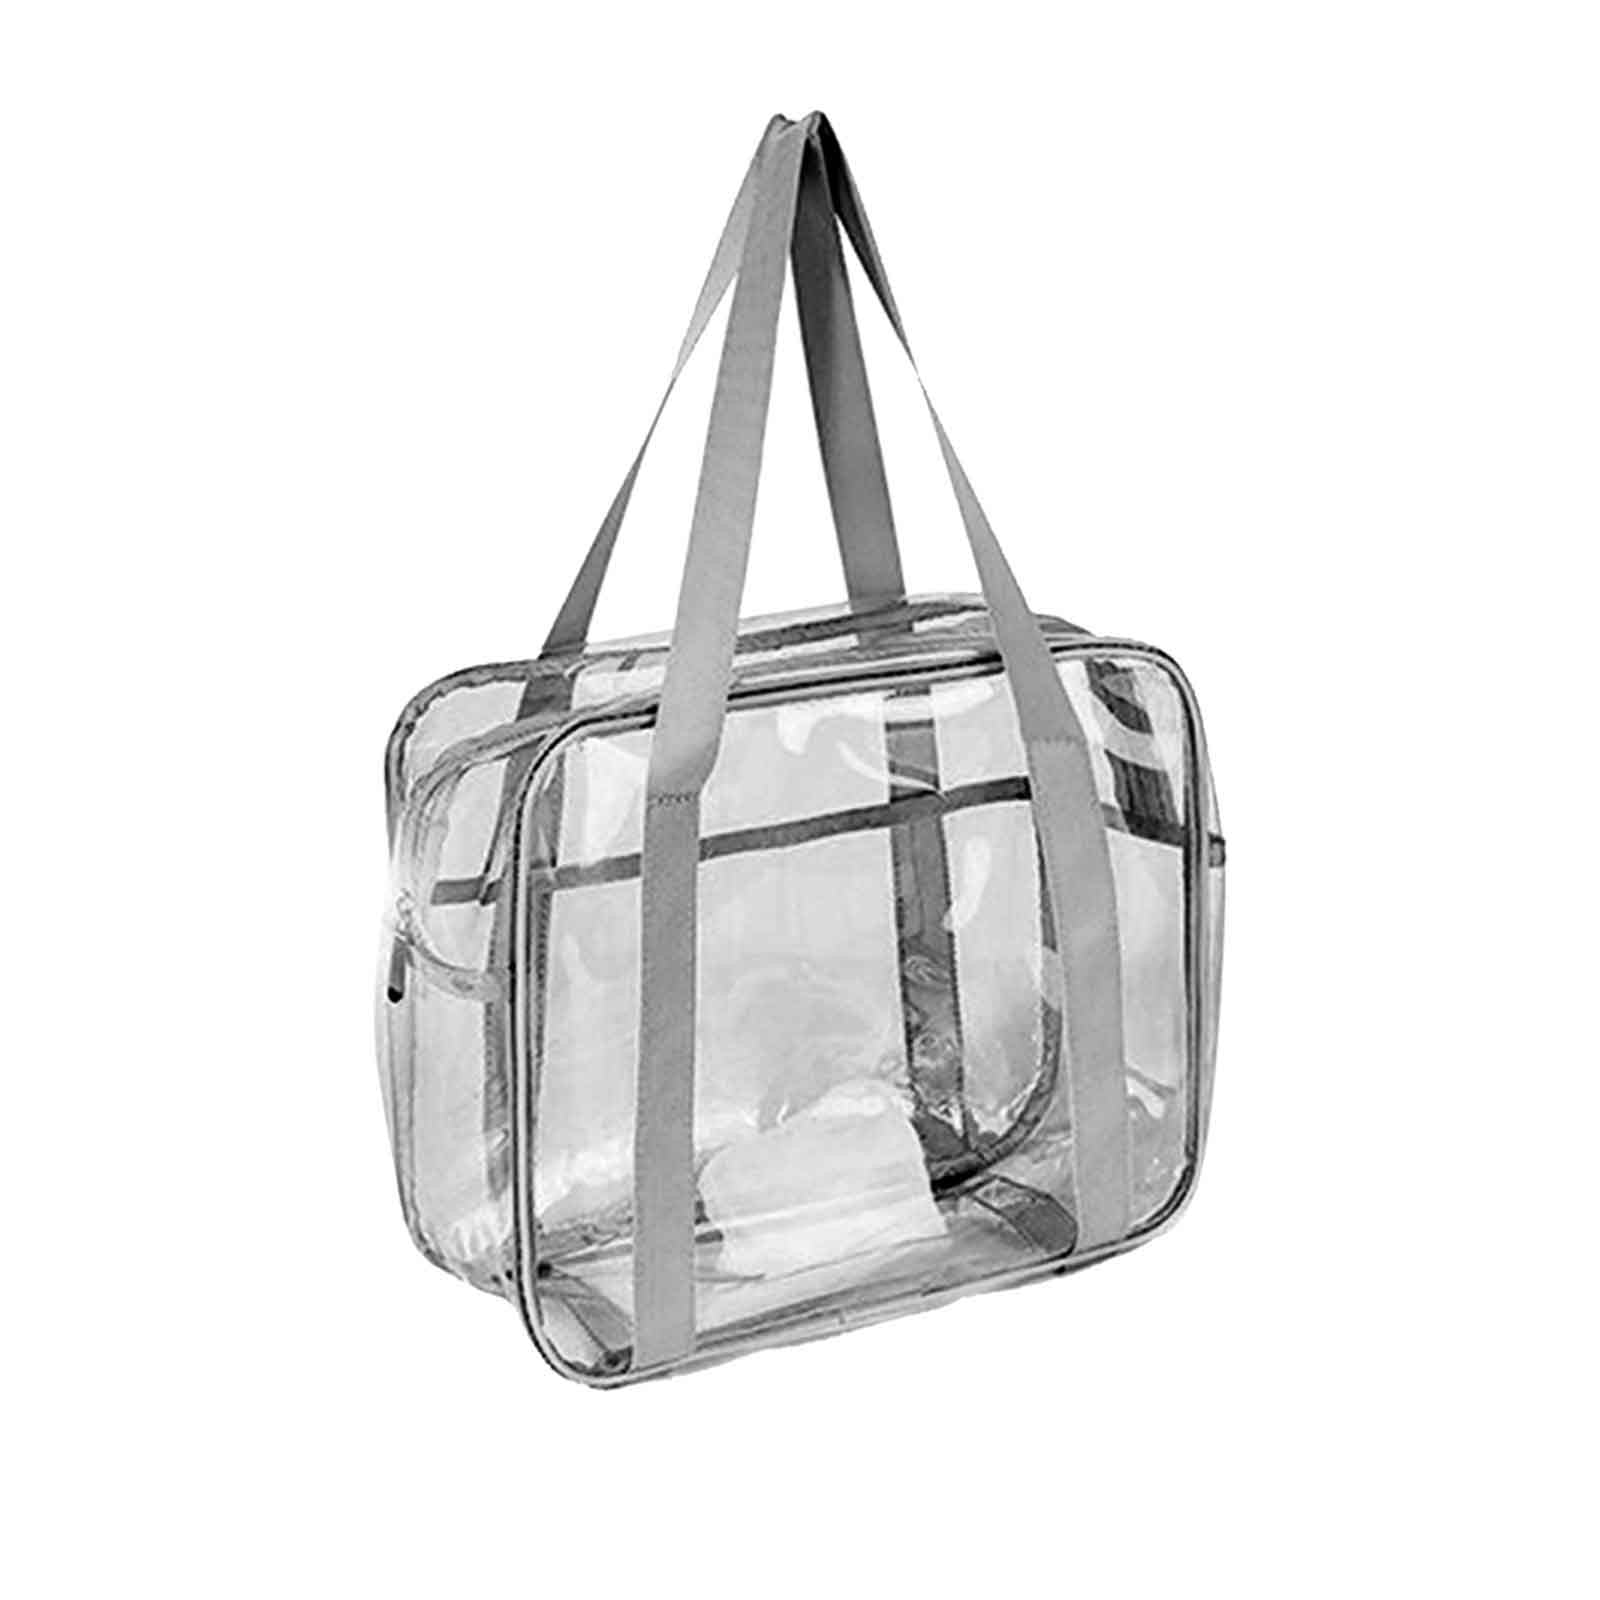 Wovilon Clear Bag with Adjustable Strap Clear Tote Bag with Zipper Clear Bags Stadium Approved Travel & Gym for Work, Size: 7.5 x 3.9 x 3.9, Black